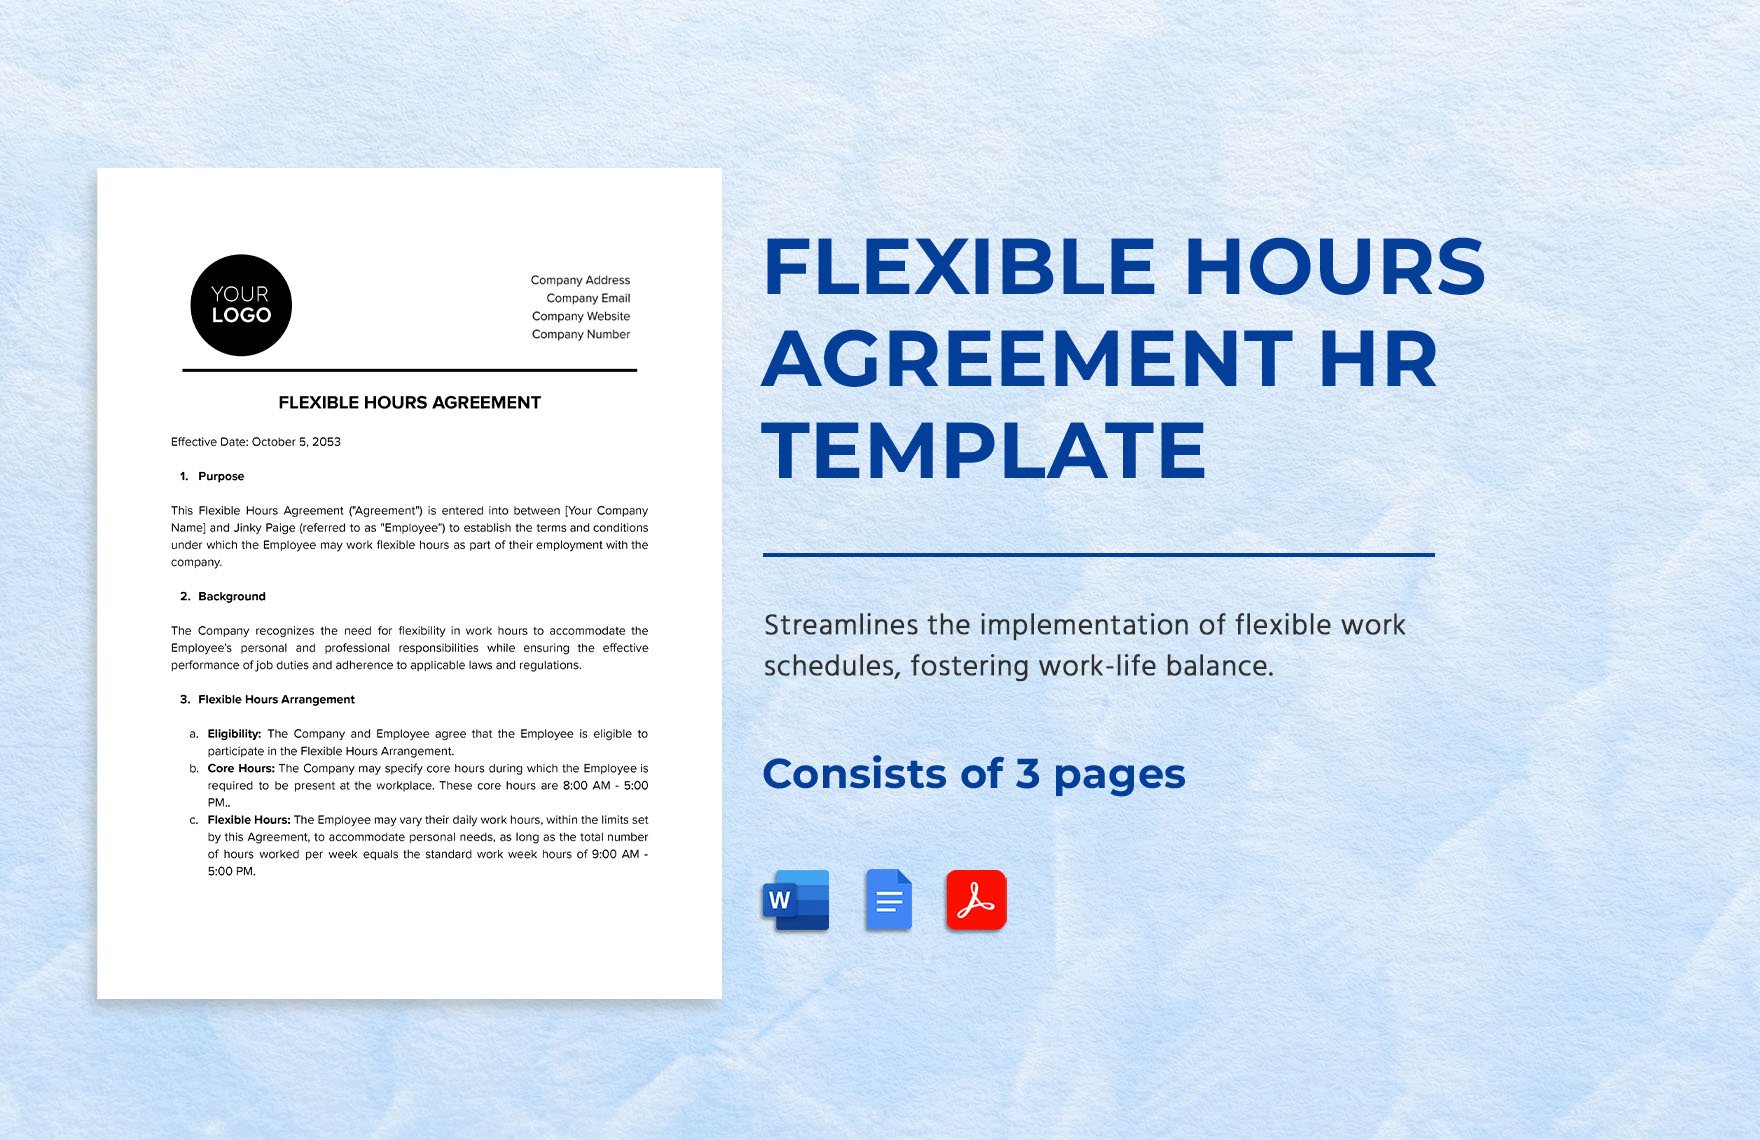 Flexible Hours Agreement HR Template in Word, Google Docs, PDF